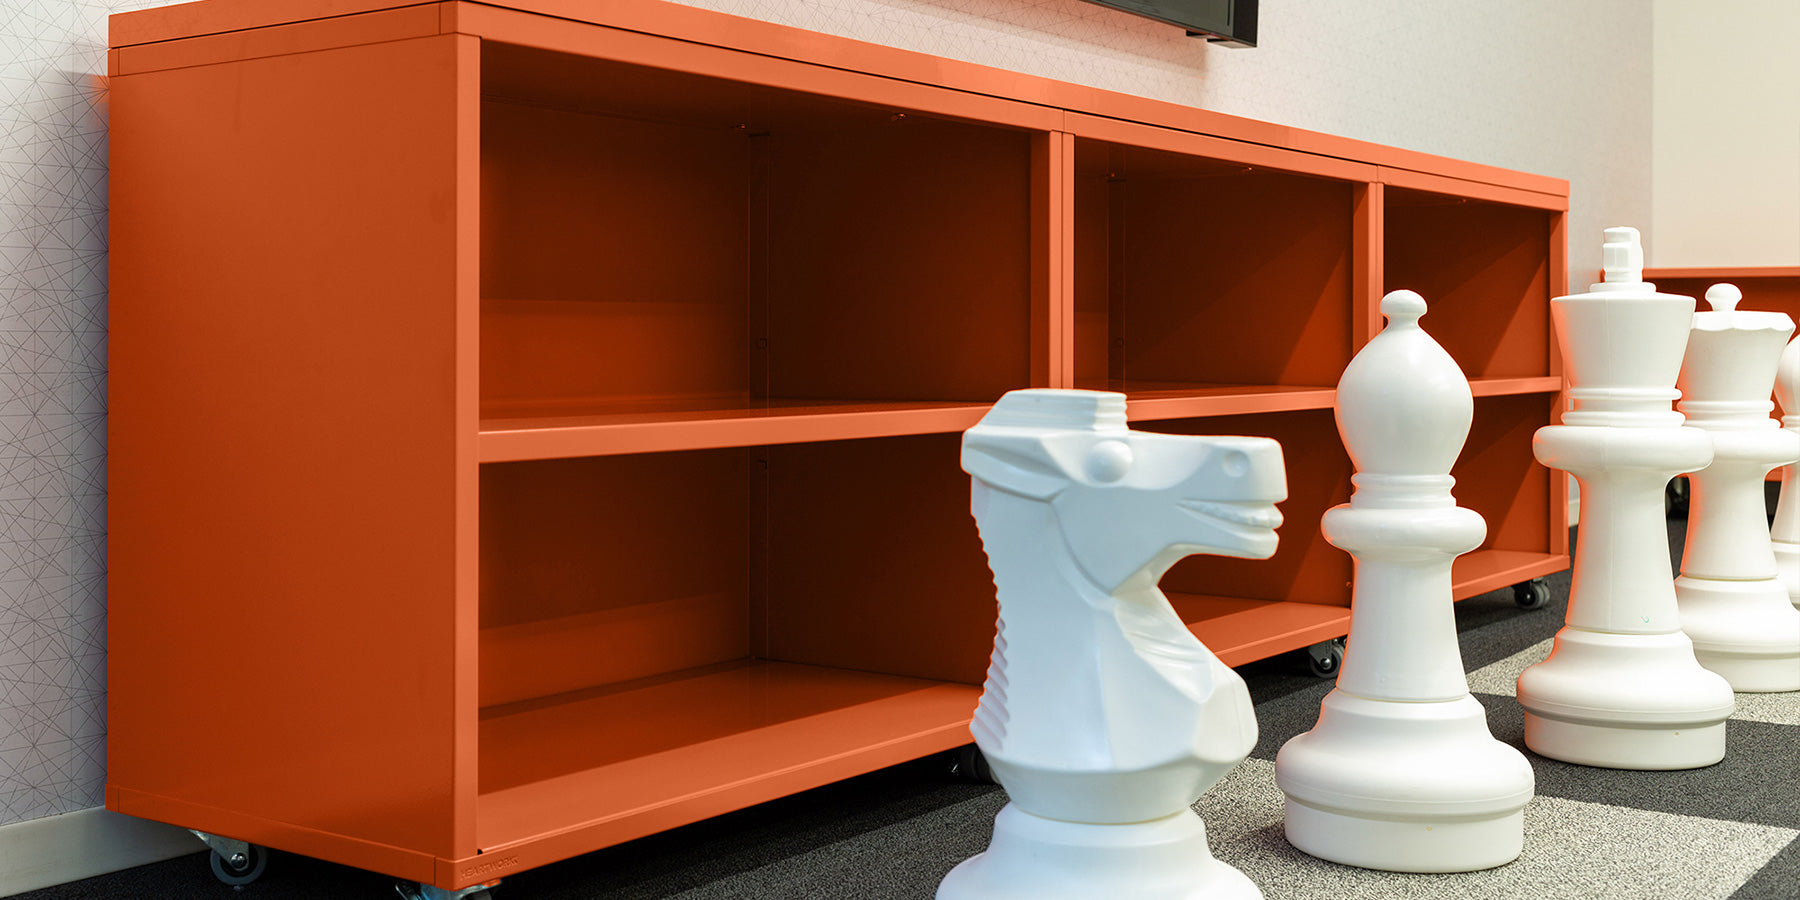 Heartwork Building Block bookcase in warm orange staged with giant white chess pieces